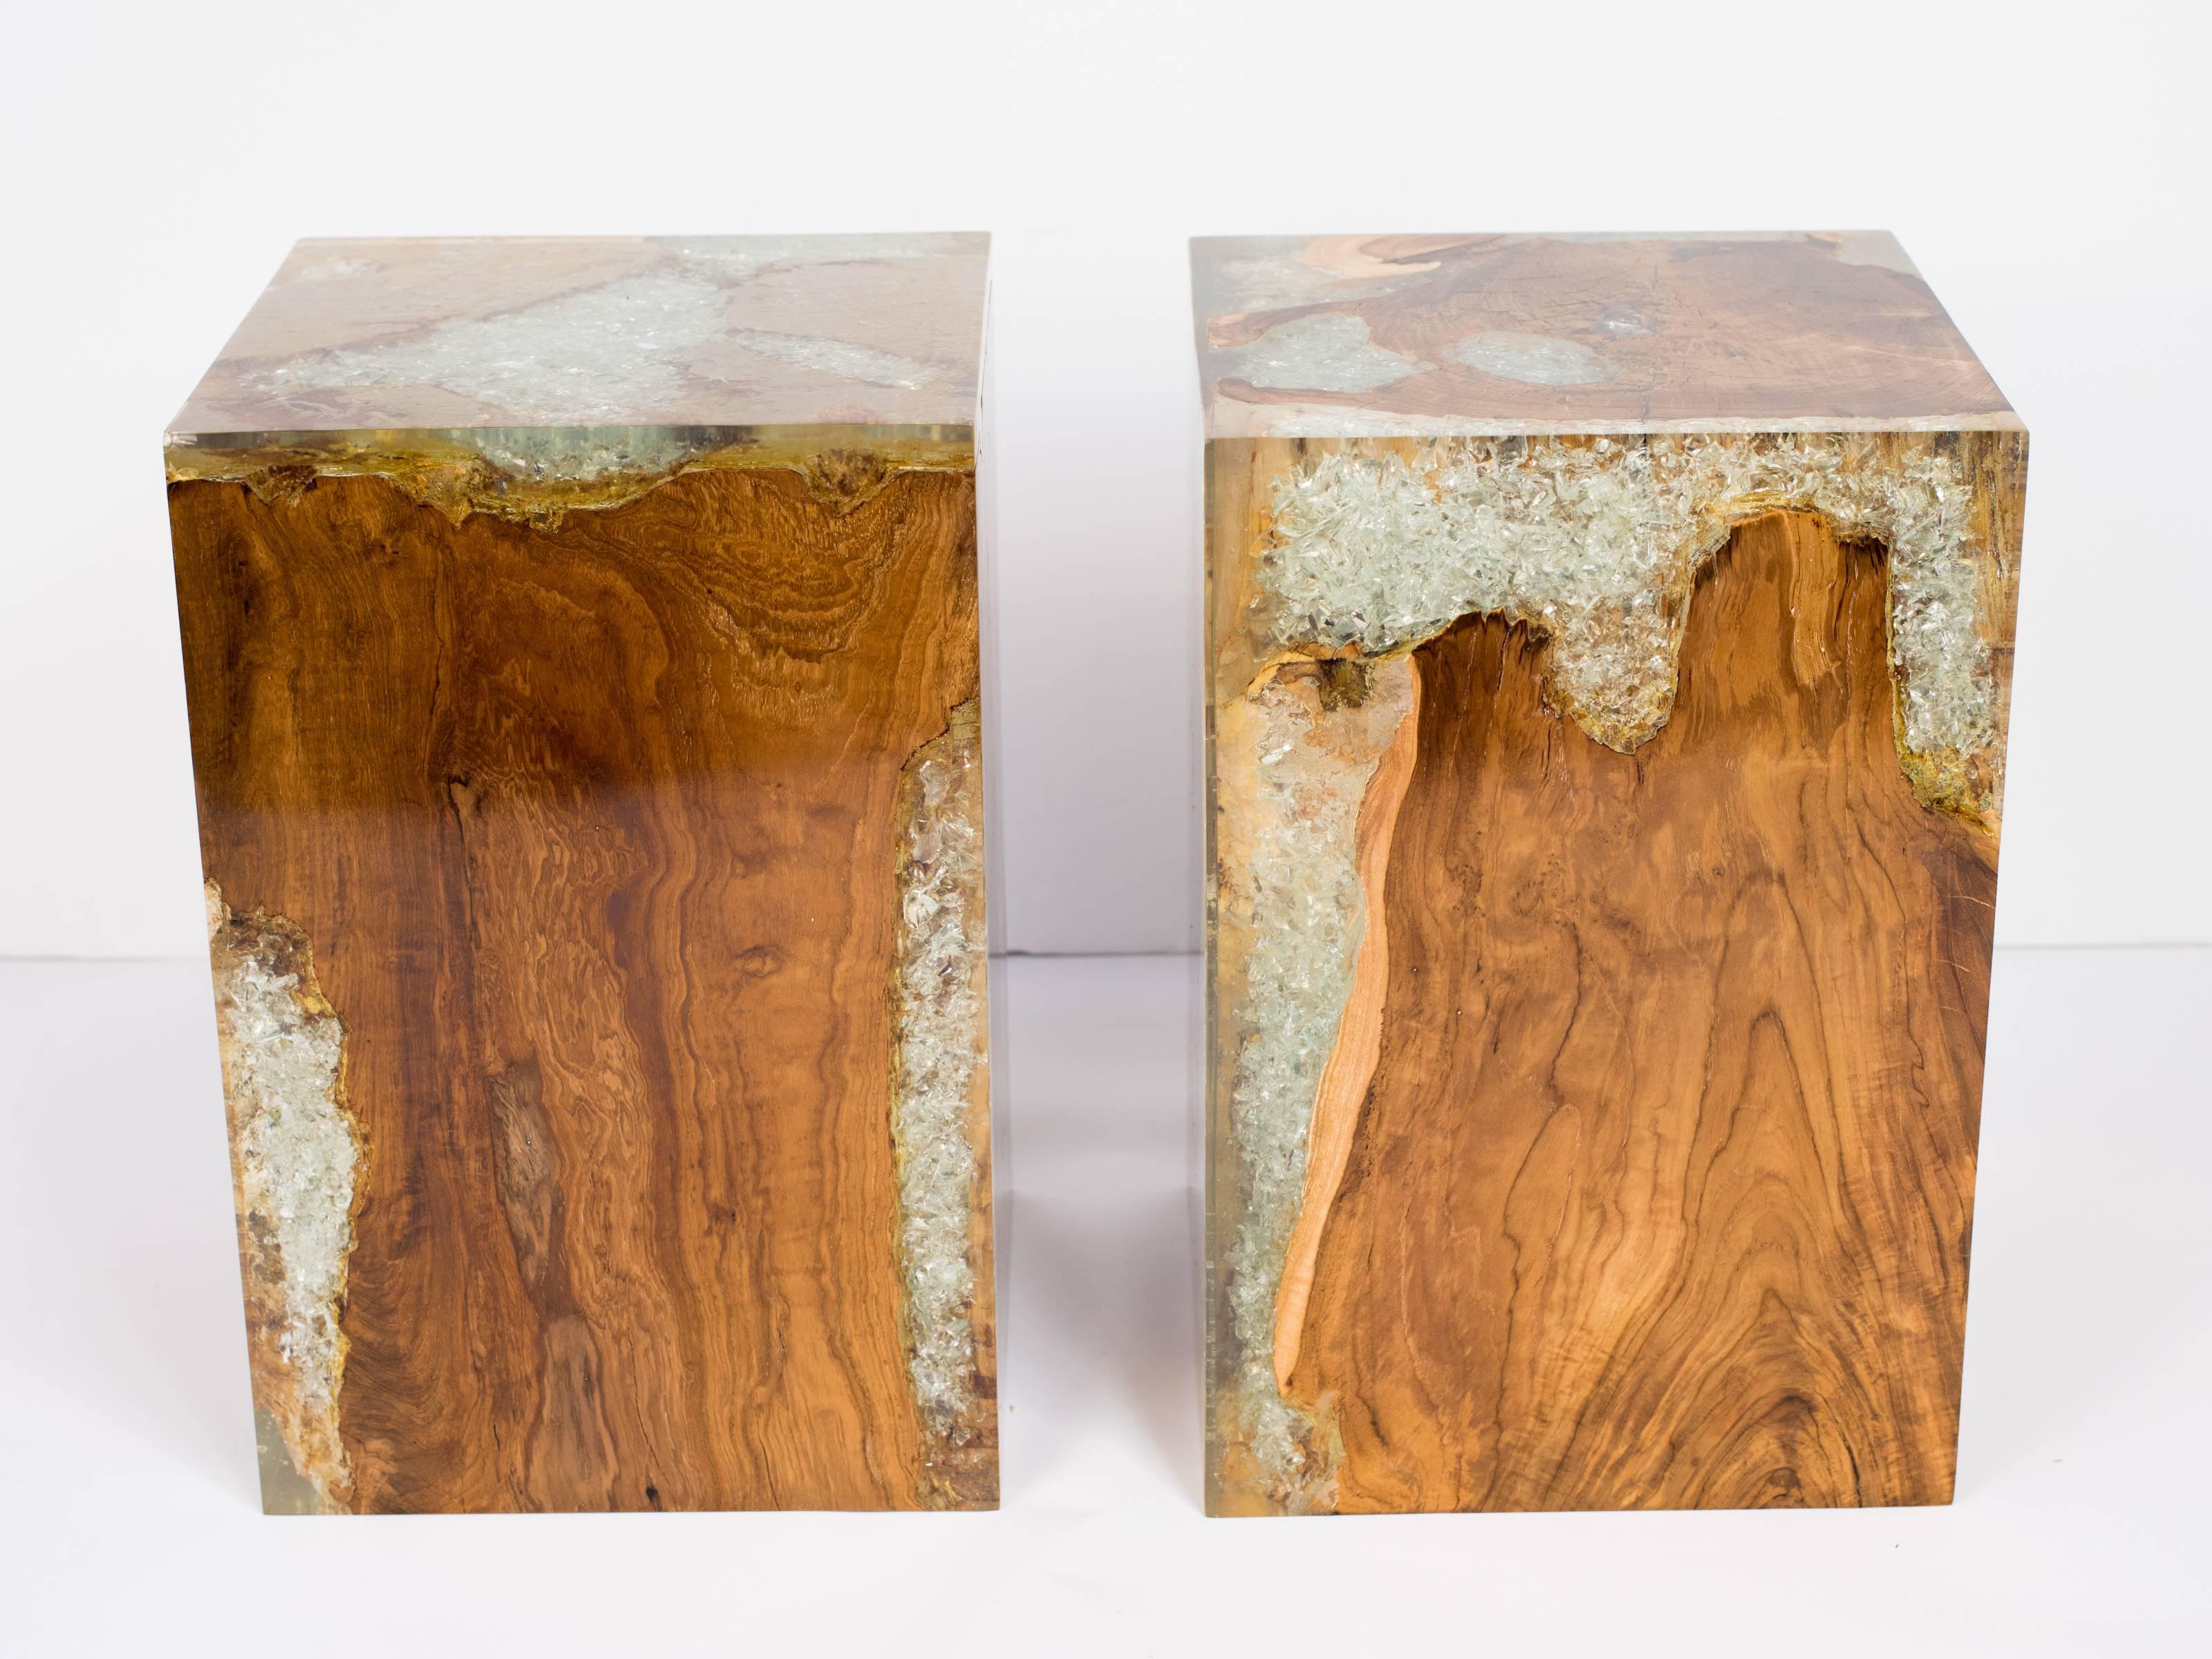 Pair of Bleached Teak Wood and Resin Side Tables or Stools, Indonesia In Excellent Condition For Sale In Fort Lauderdale, FL